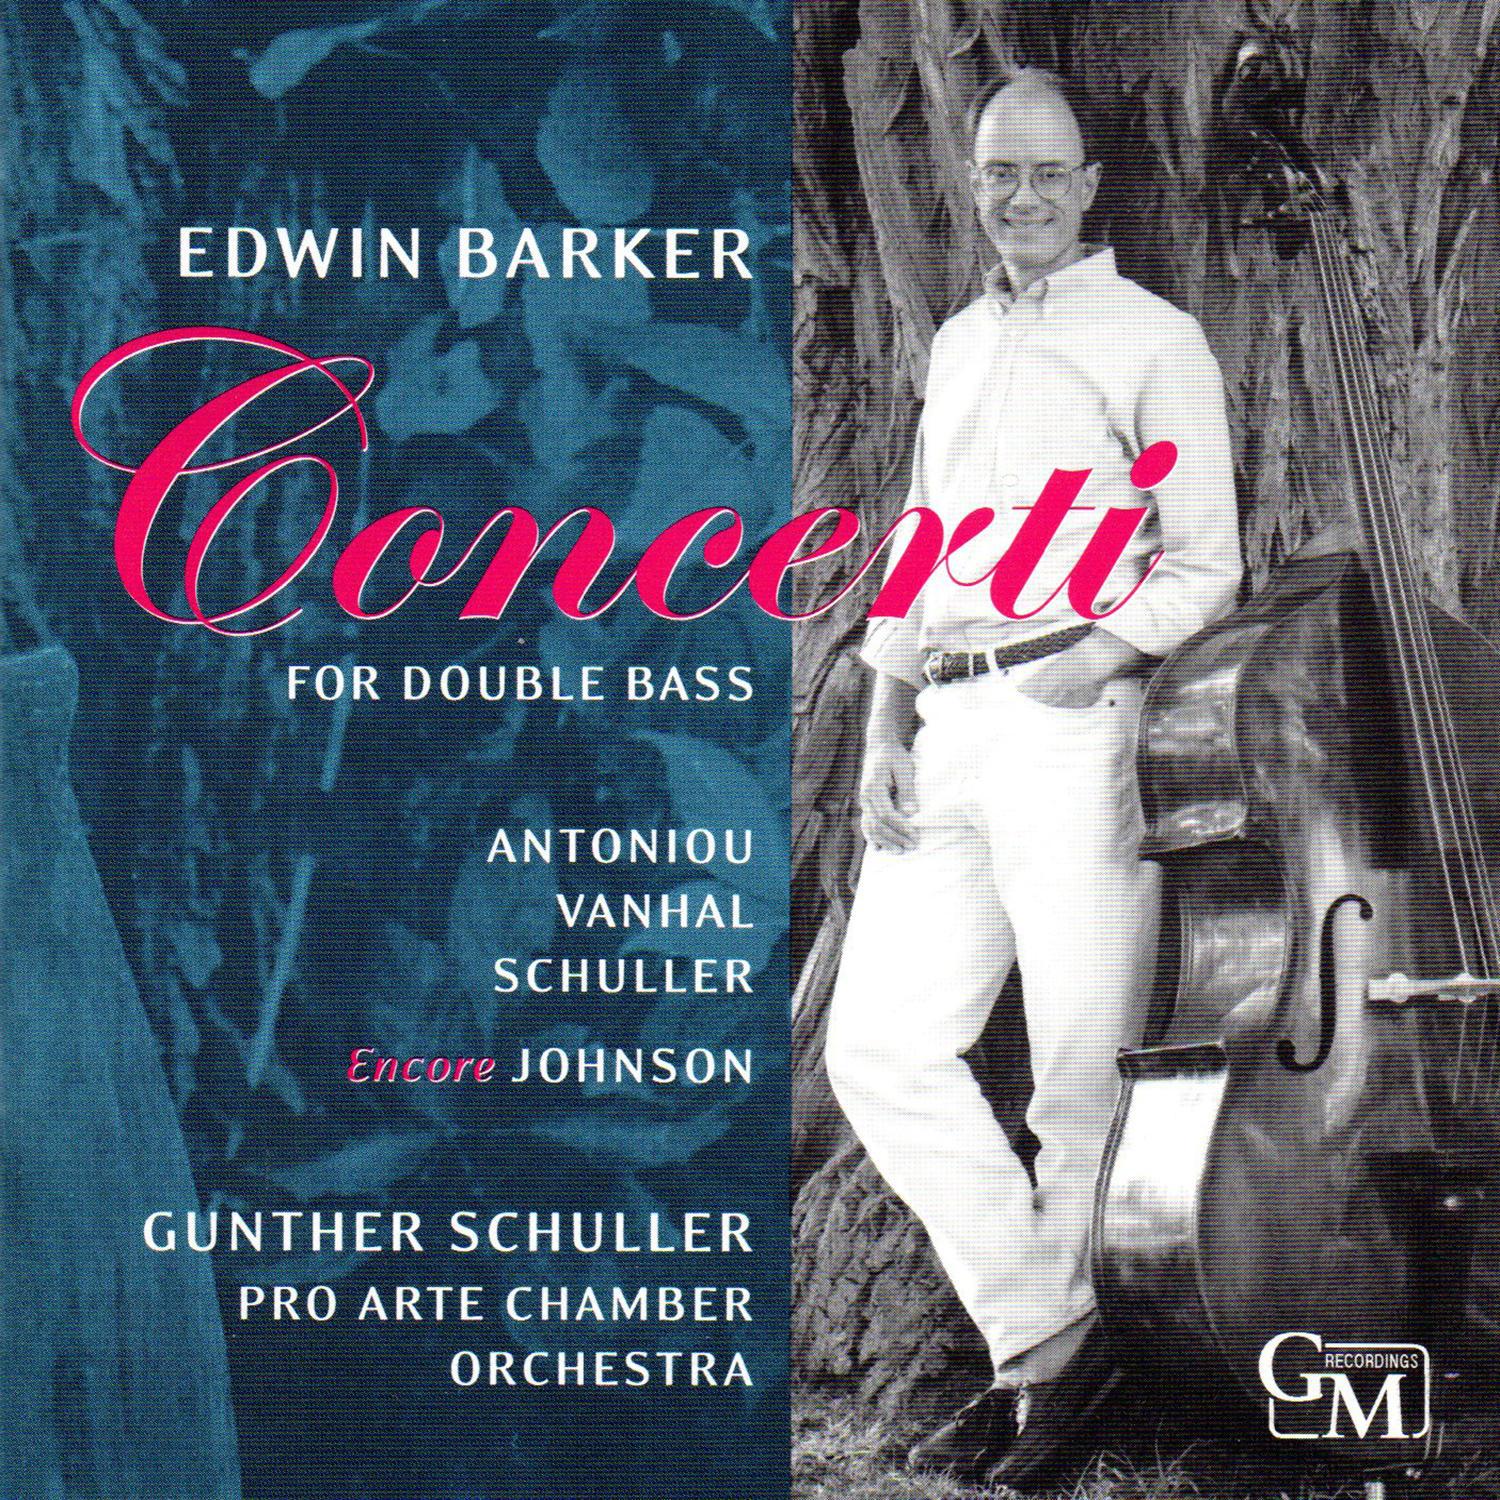 Concerto in D Major for Double Bass and Orchestra: I. Allegro moderato